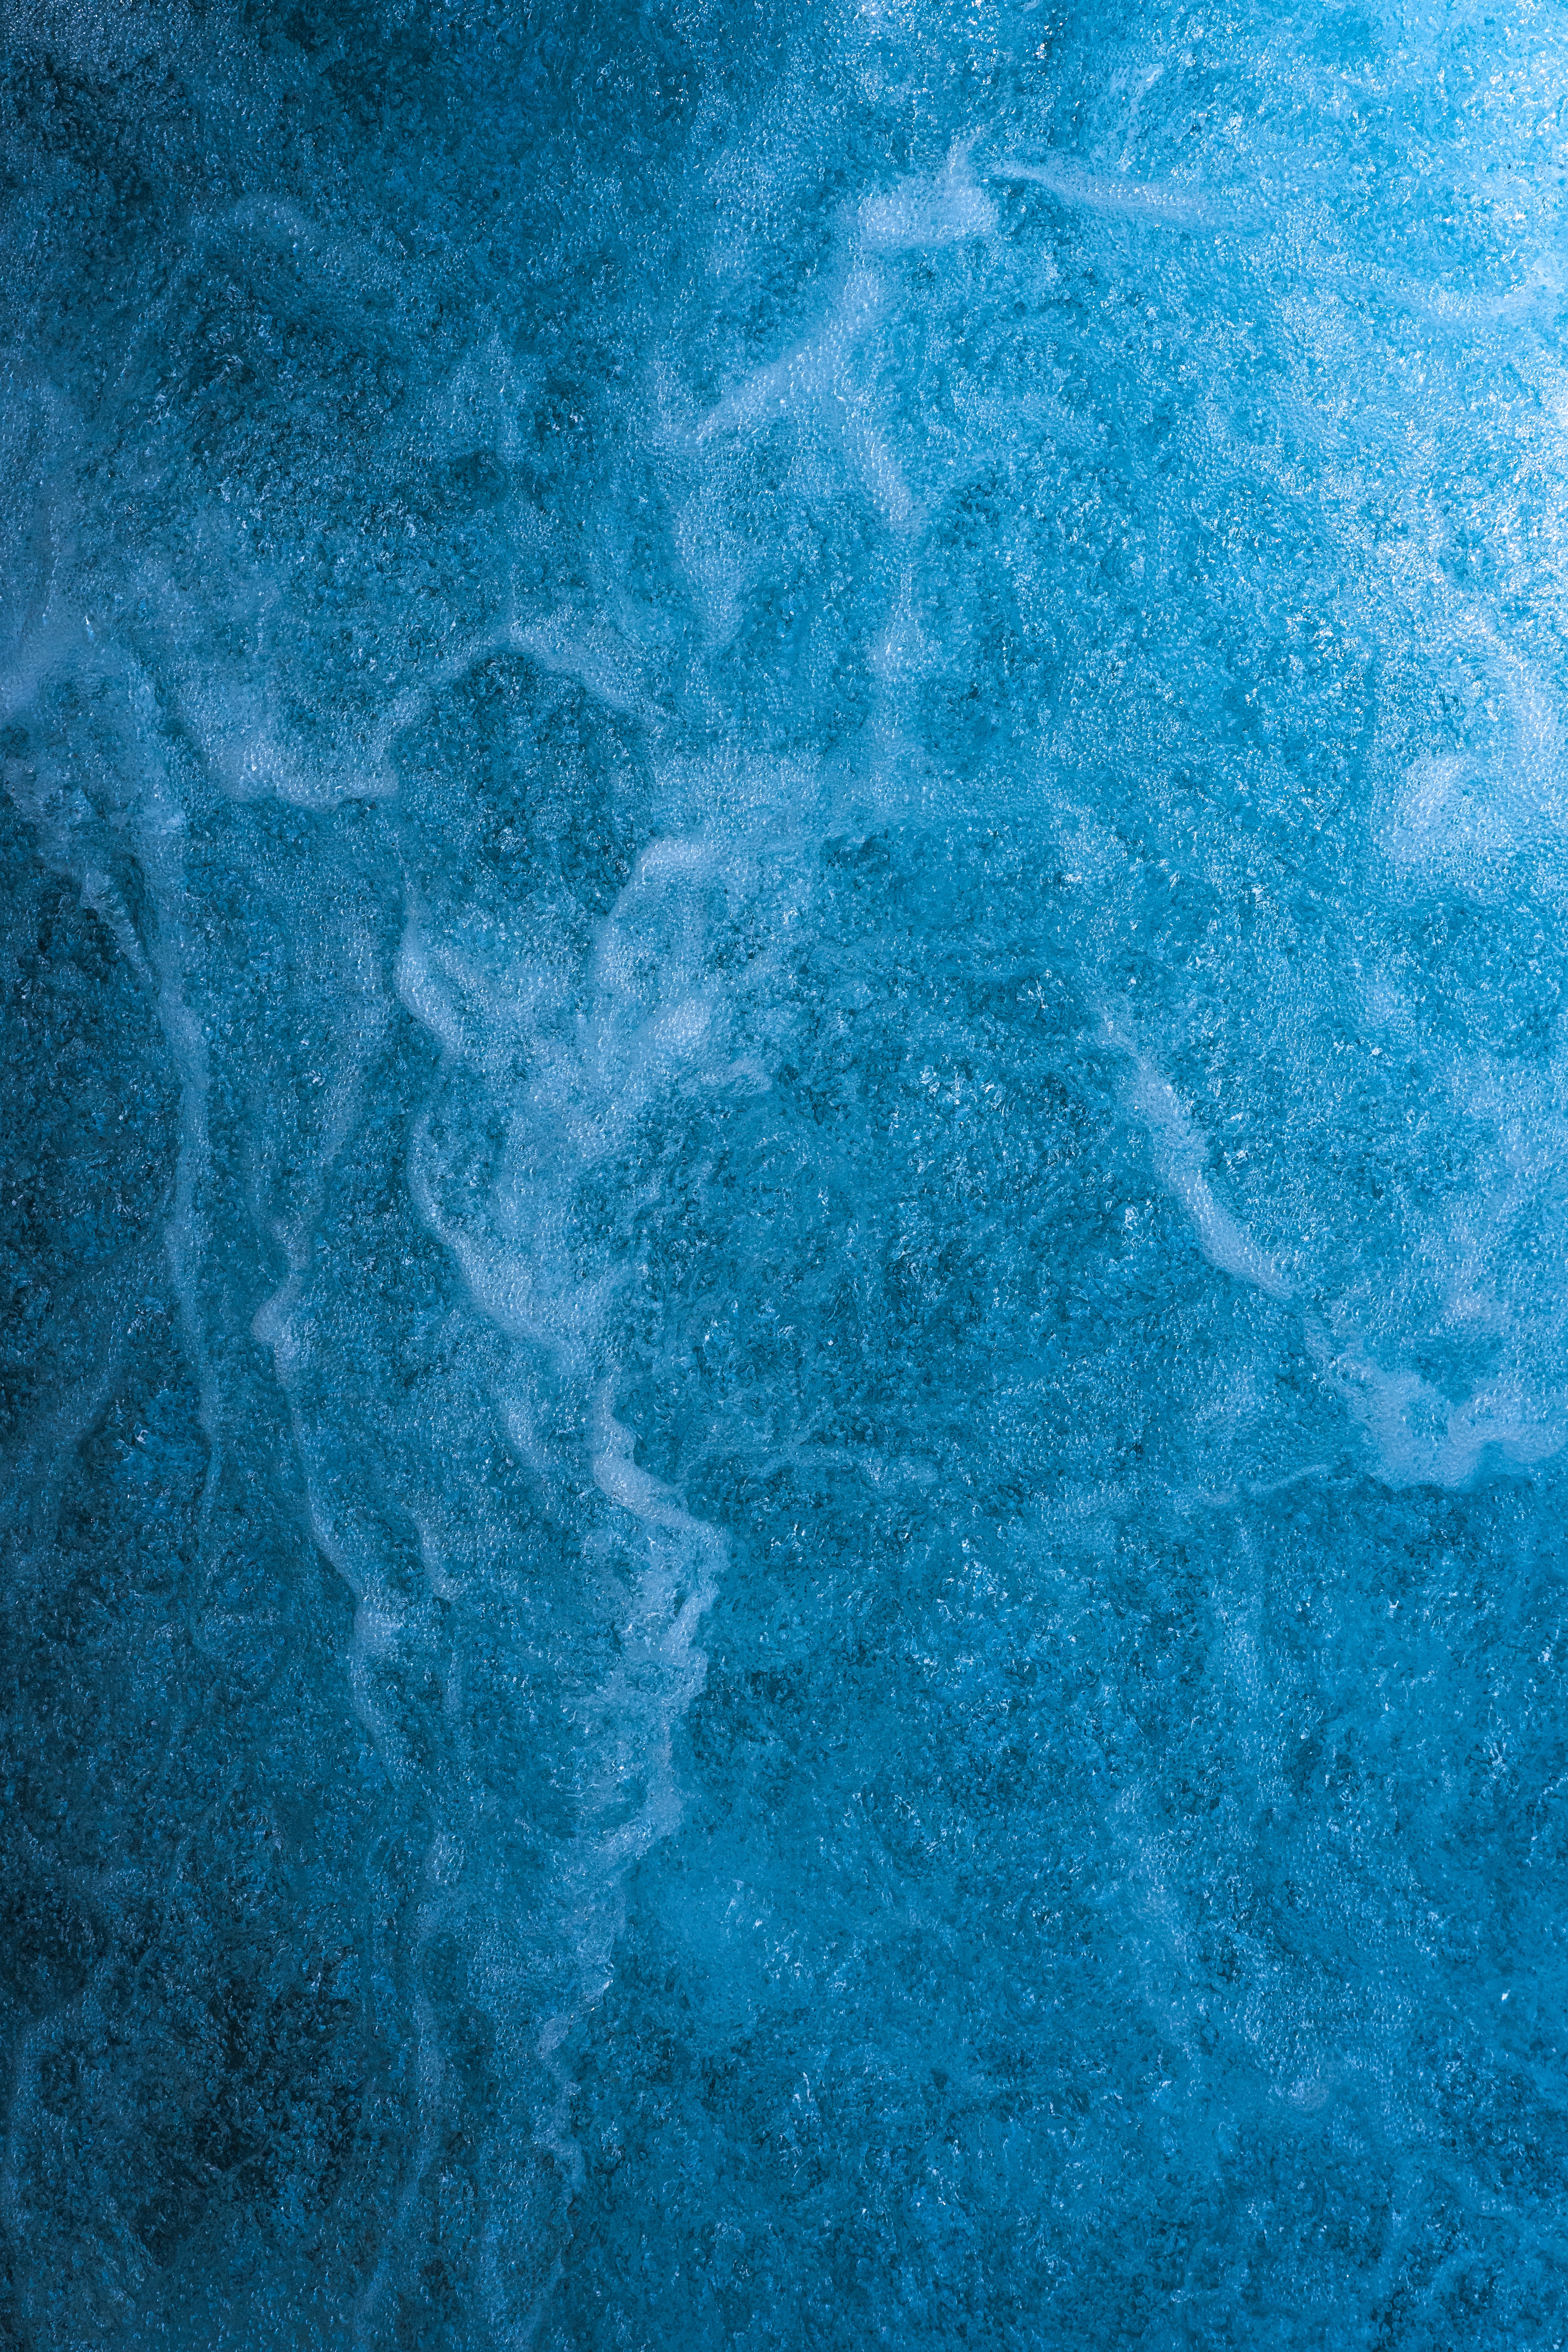 textures, texture, water, waves, blue, liquid cell phone wallpapers